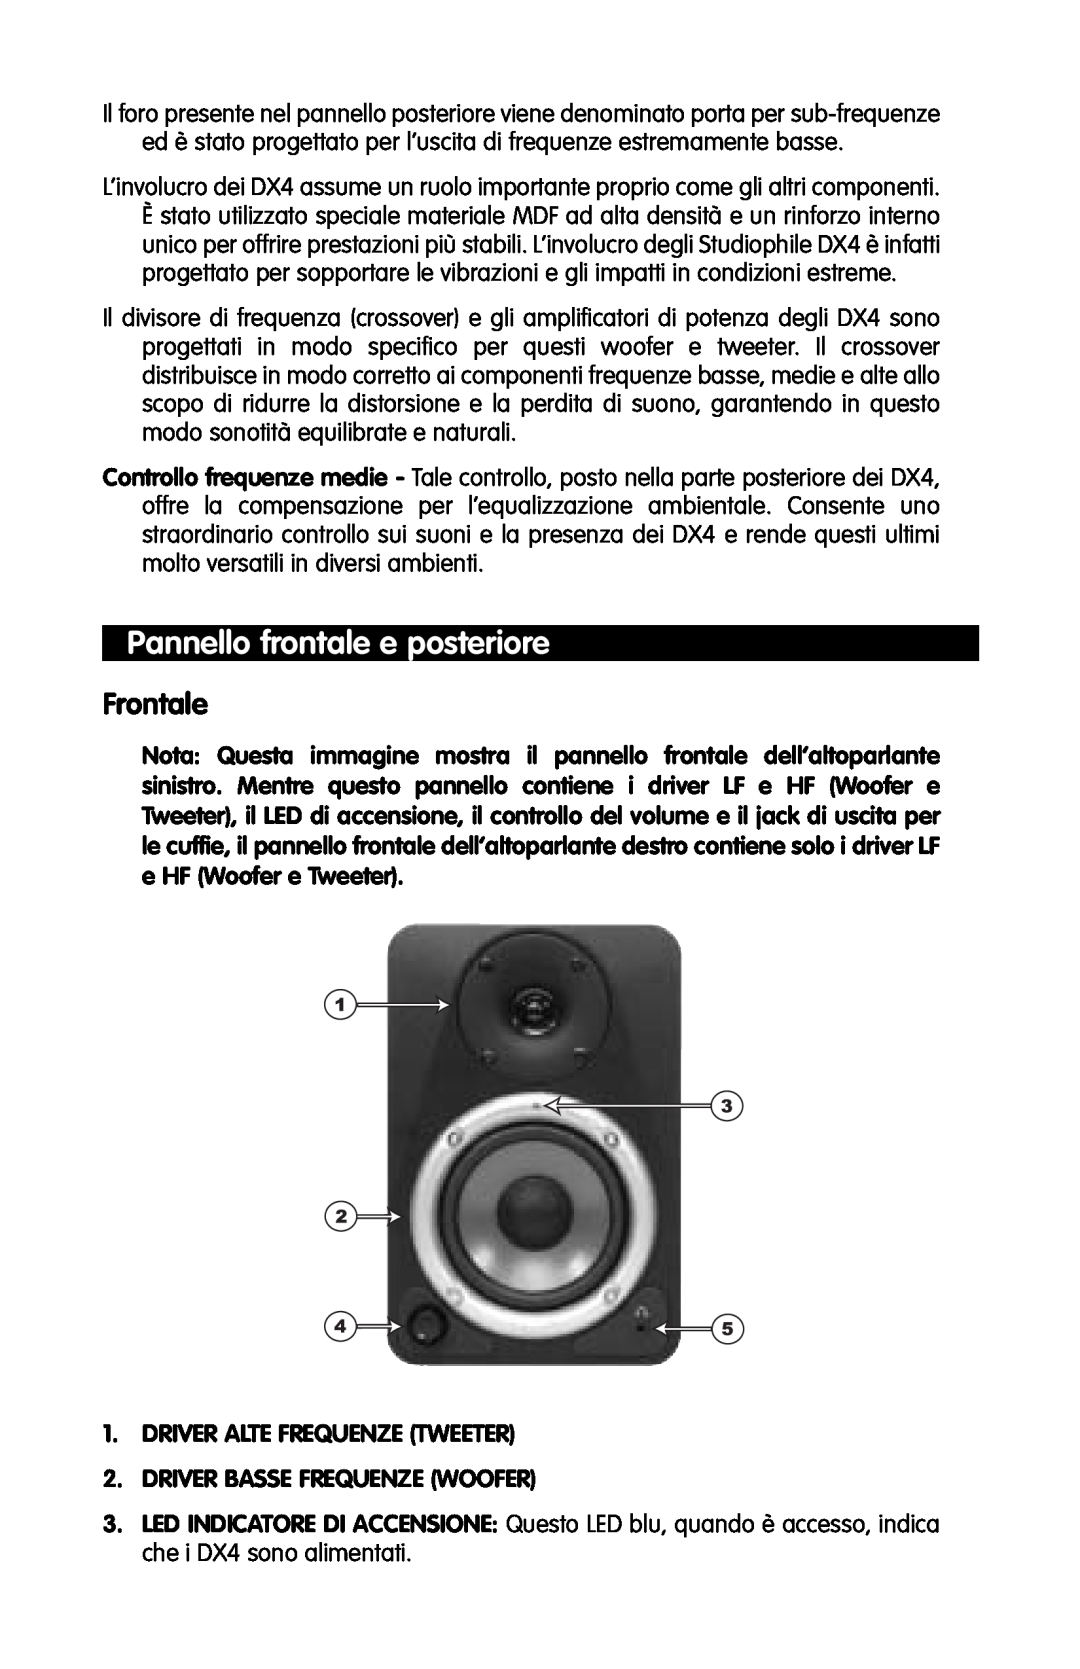 M-Audio DX4 manual Pannello frontale e posteriore, Frontale, DRIVER ALTE FREQUENZE TWEETER 2. DRIVER BASSE FREQUENZE WOOFER 